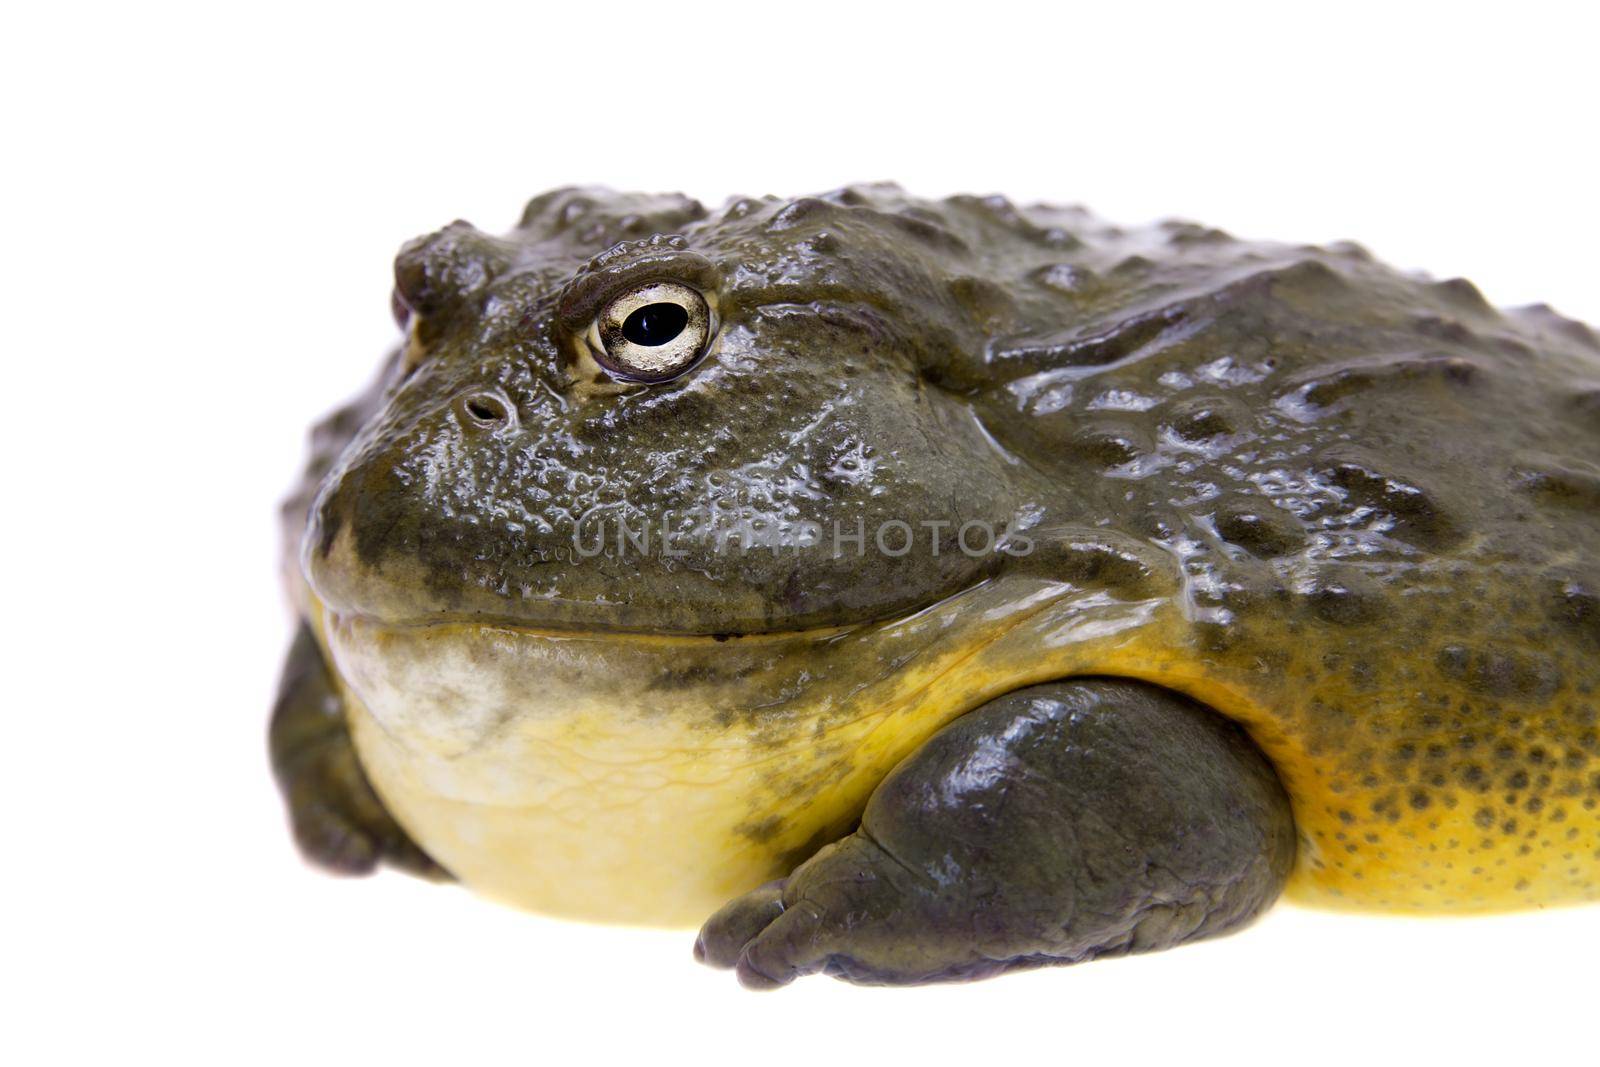 The African bullfrog, Pyxicephalus adspersus, isolated on white background